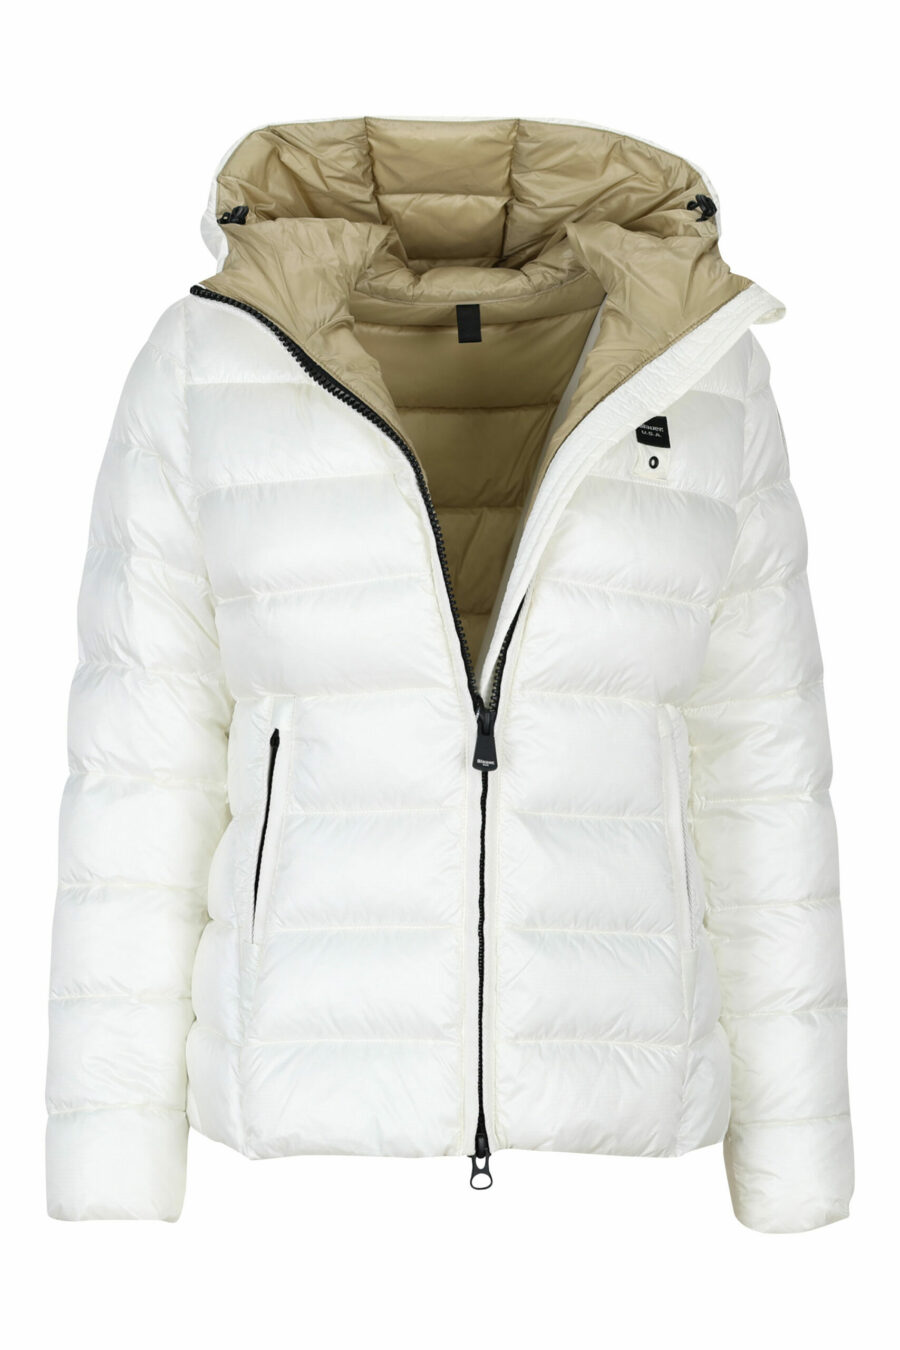 White straight lined hooded jacket with beige inside with logo patch - 8058610675653 1 scaled